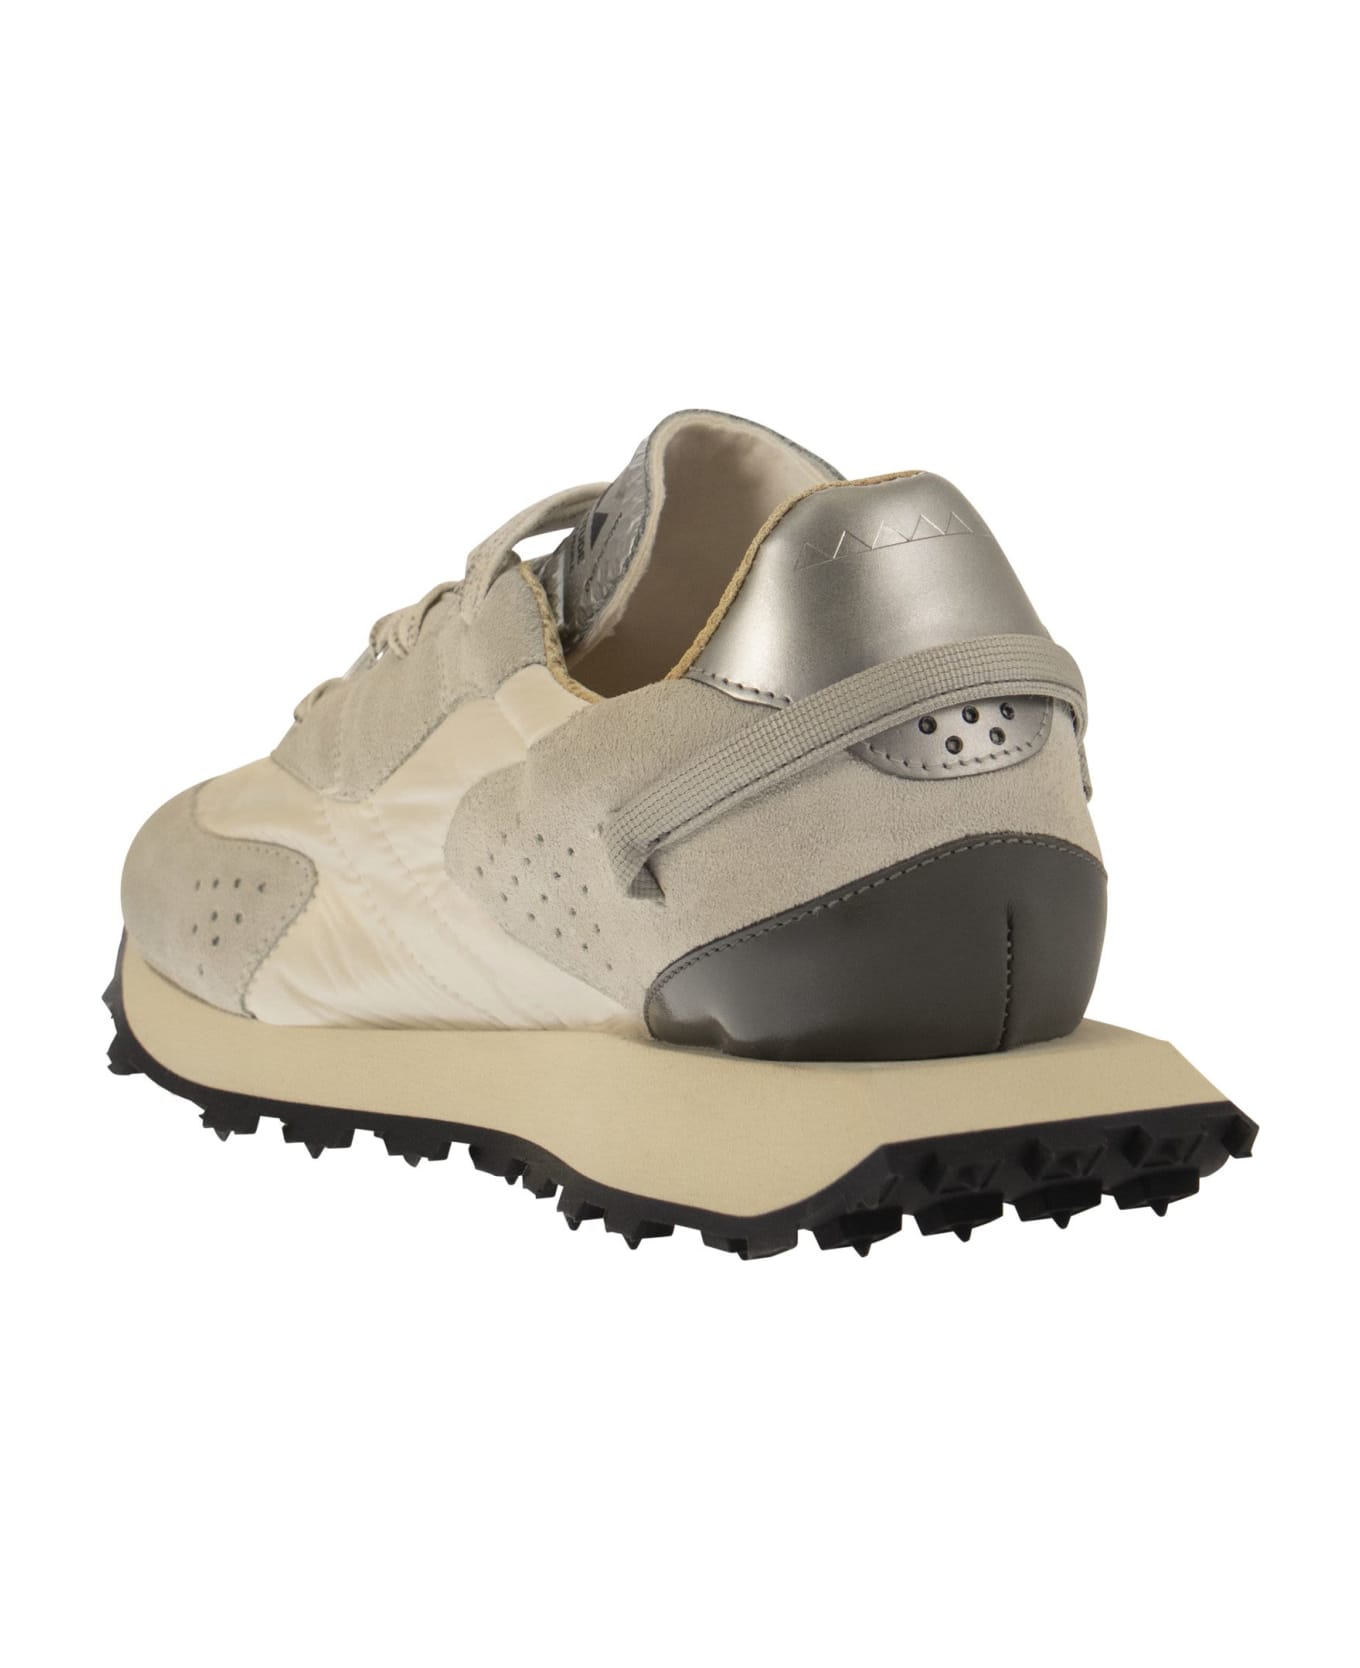 RUN OF Vaporix - Suede And Nylon Trainers - Sand スニーカー